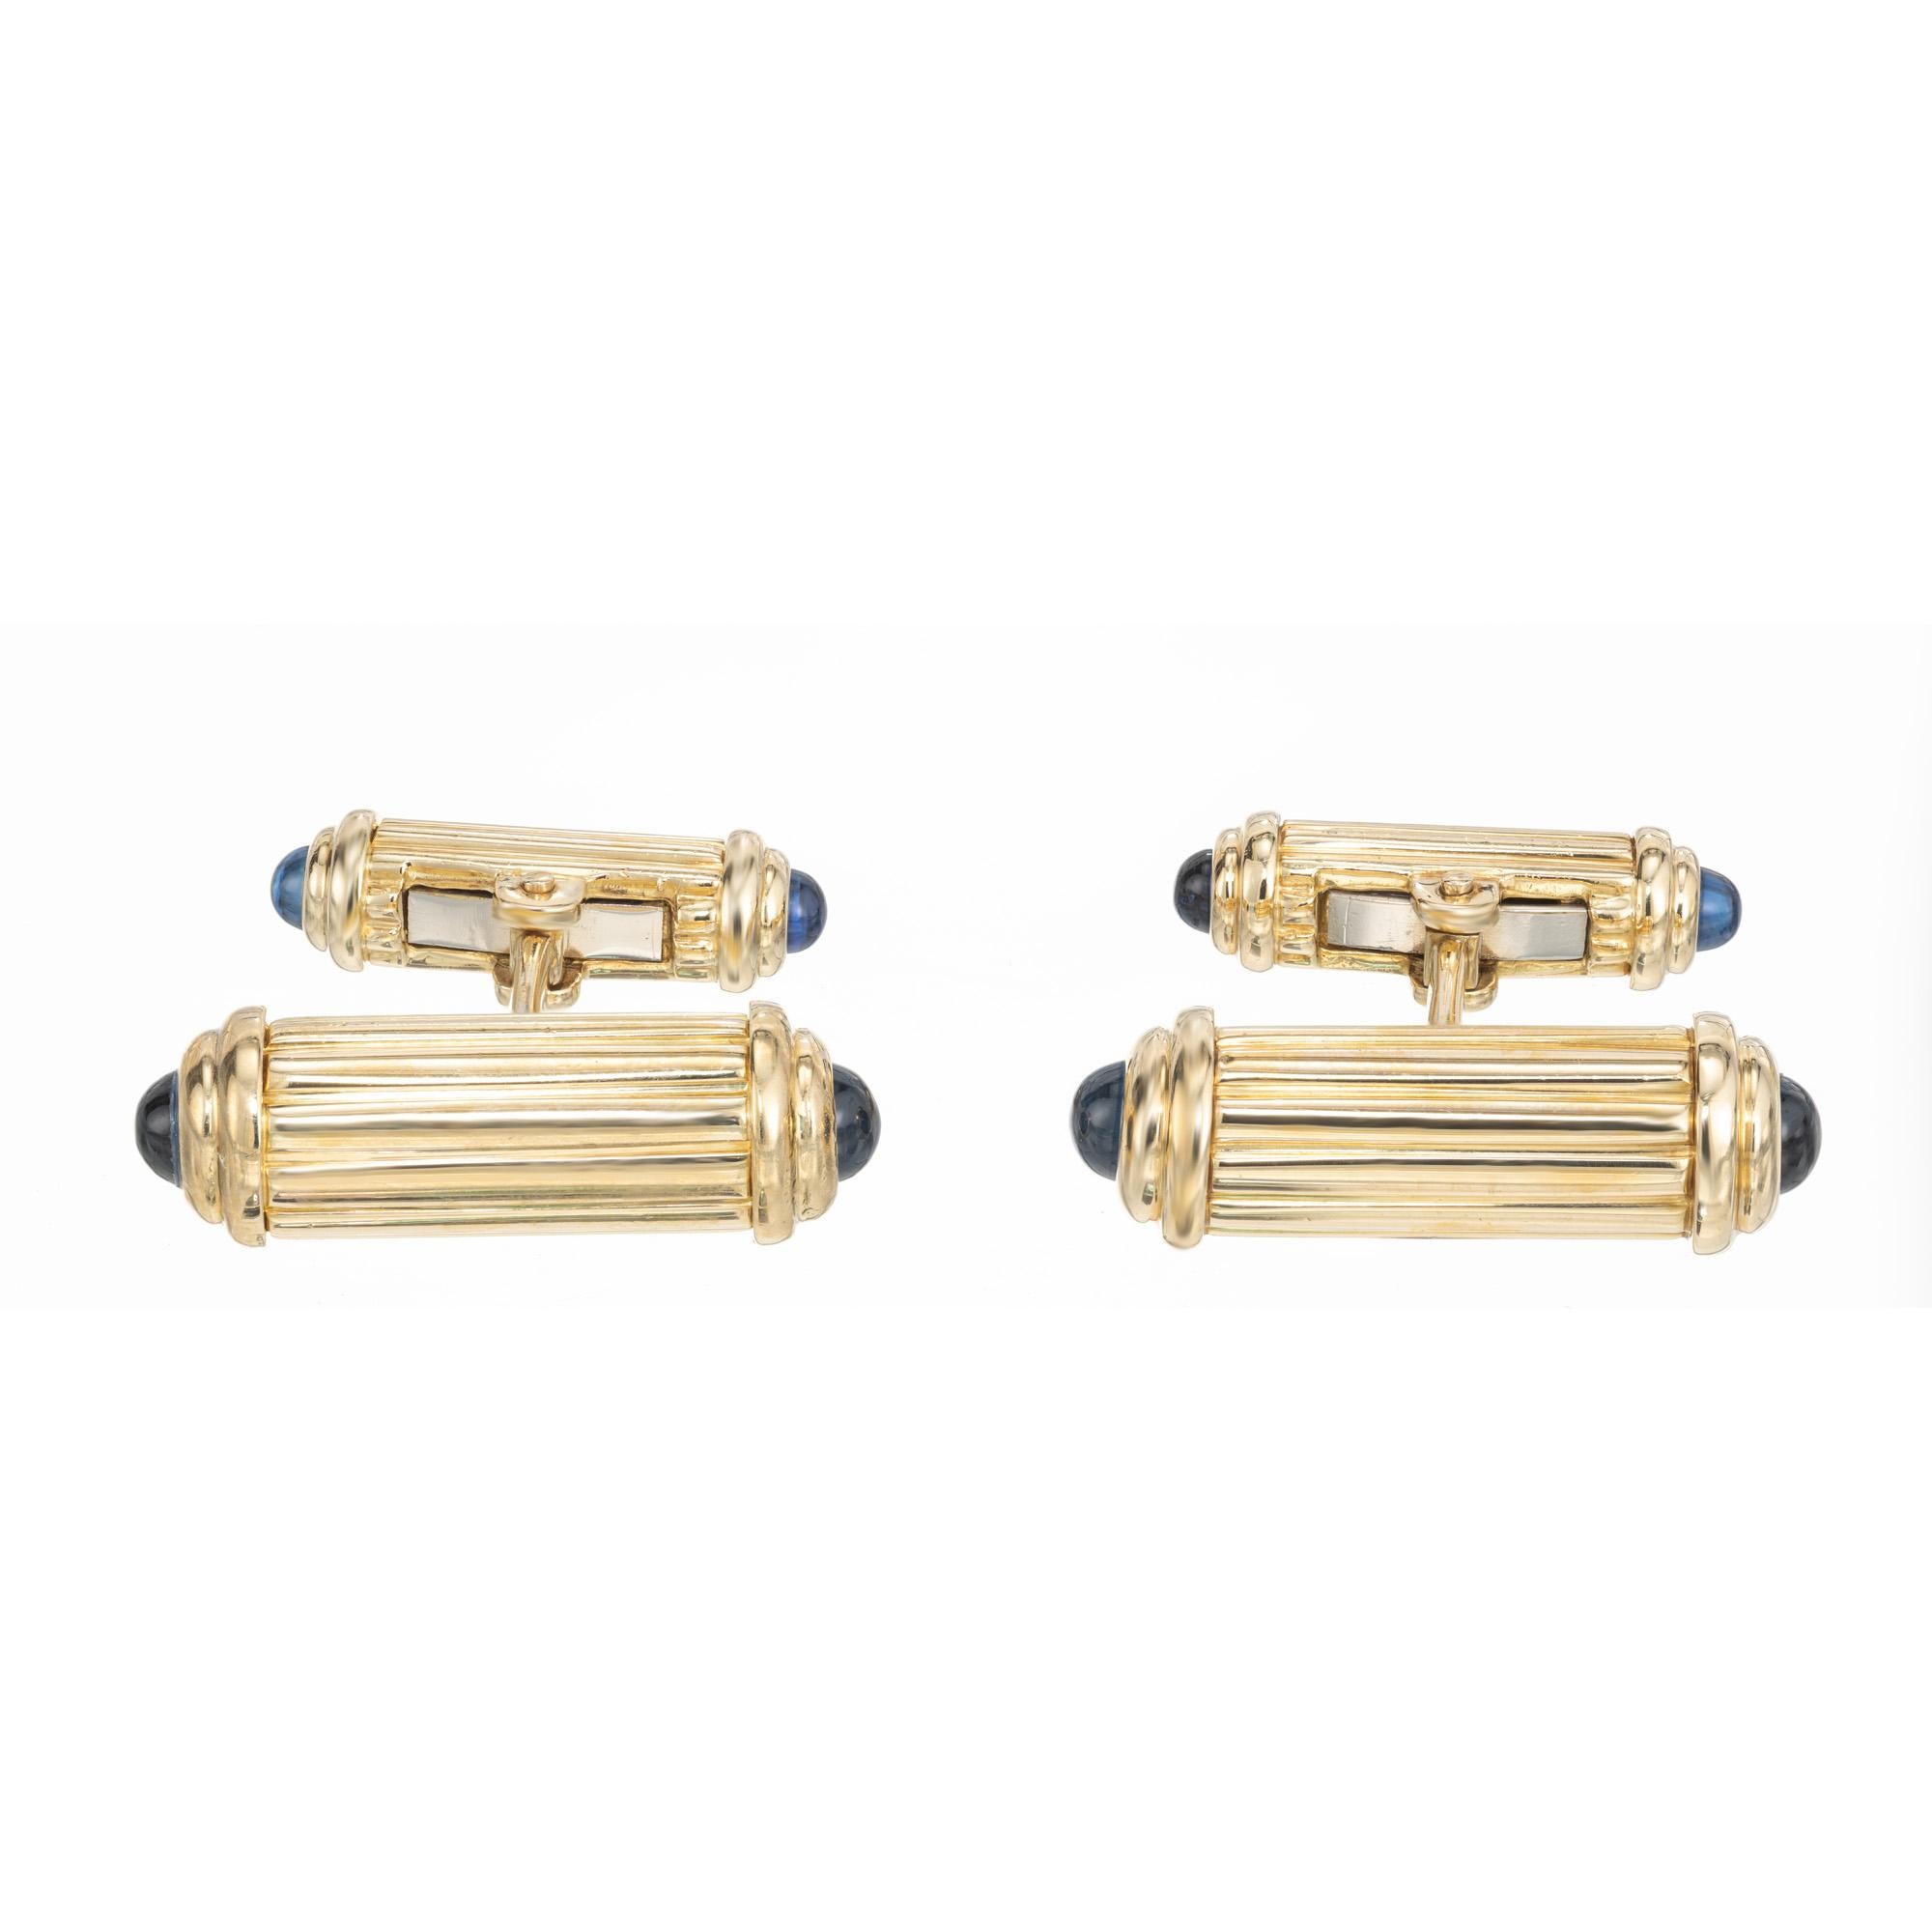 Black Starr and Frost men's cufflinks. 18k yellow gold double sided cylinder cufflinks, each end of the cylinders is adorned with a cabochon sapphire. Classic and stylish. 
 Black, Starr & Frost was founded in 1810, is America's First Jeweler.